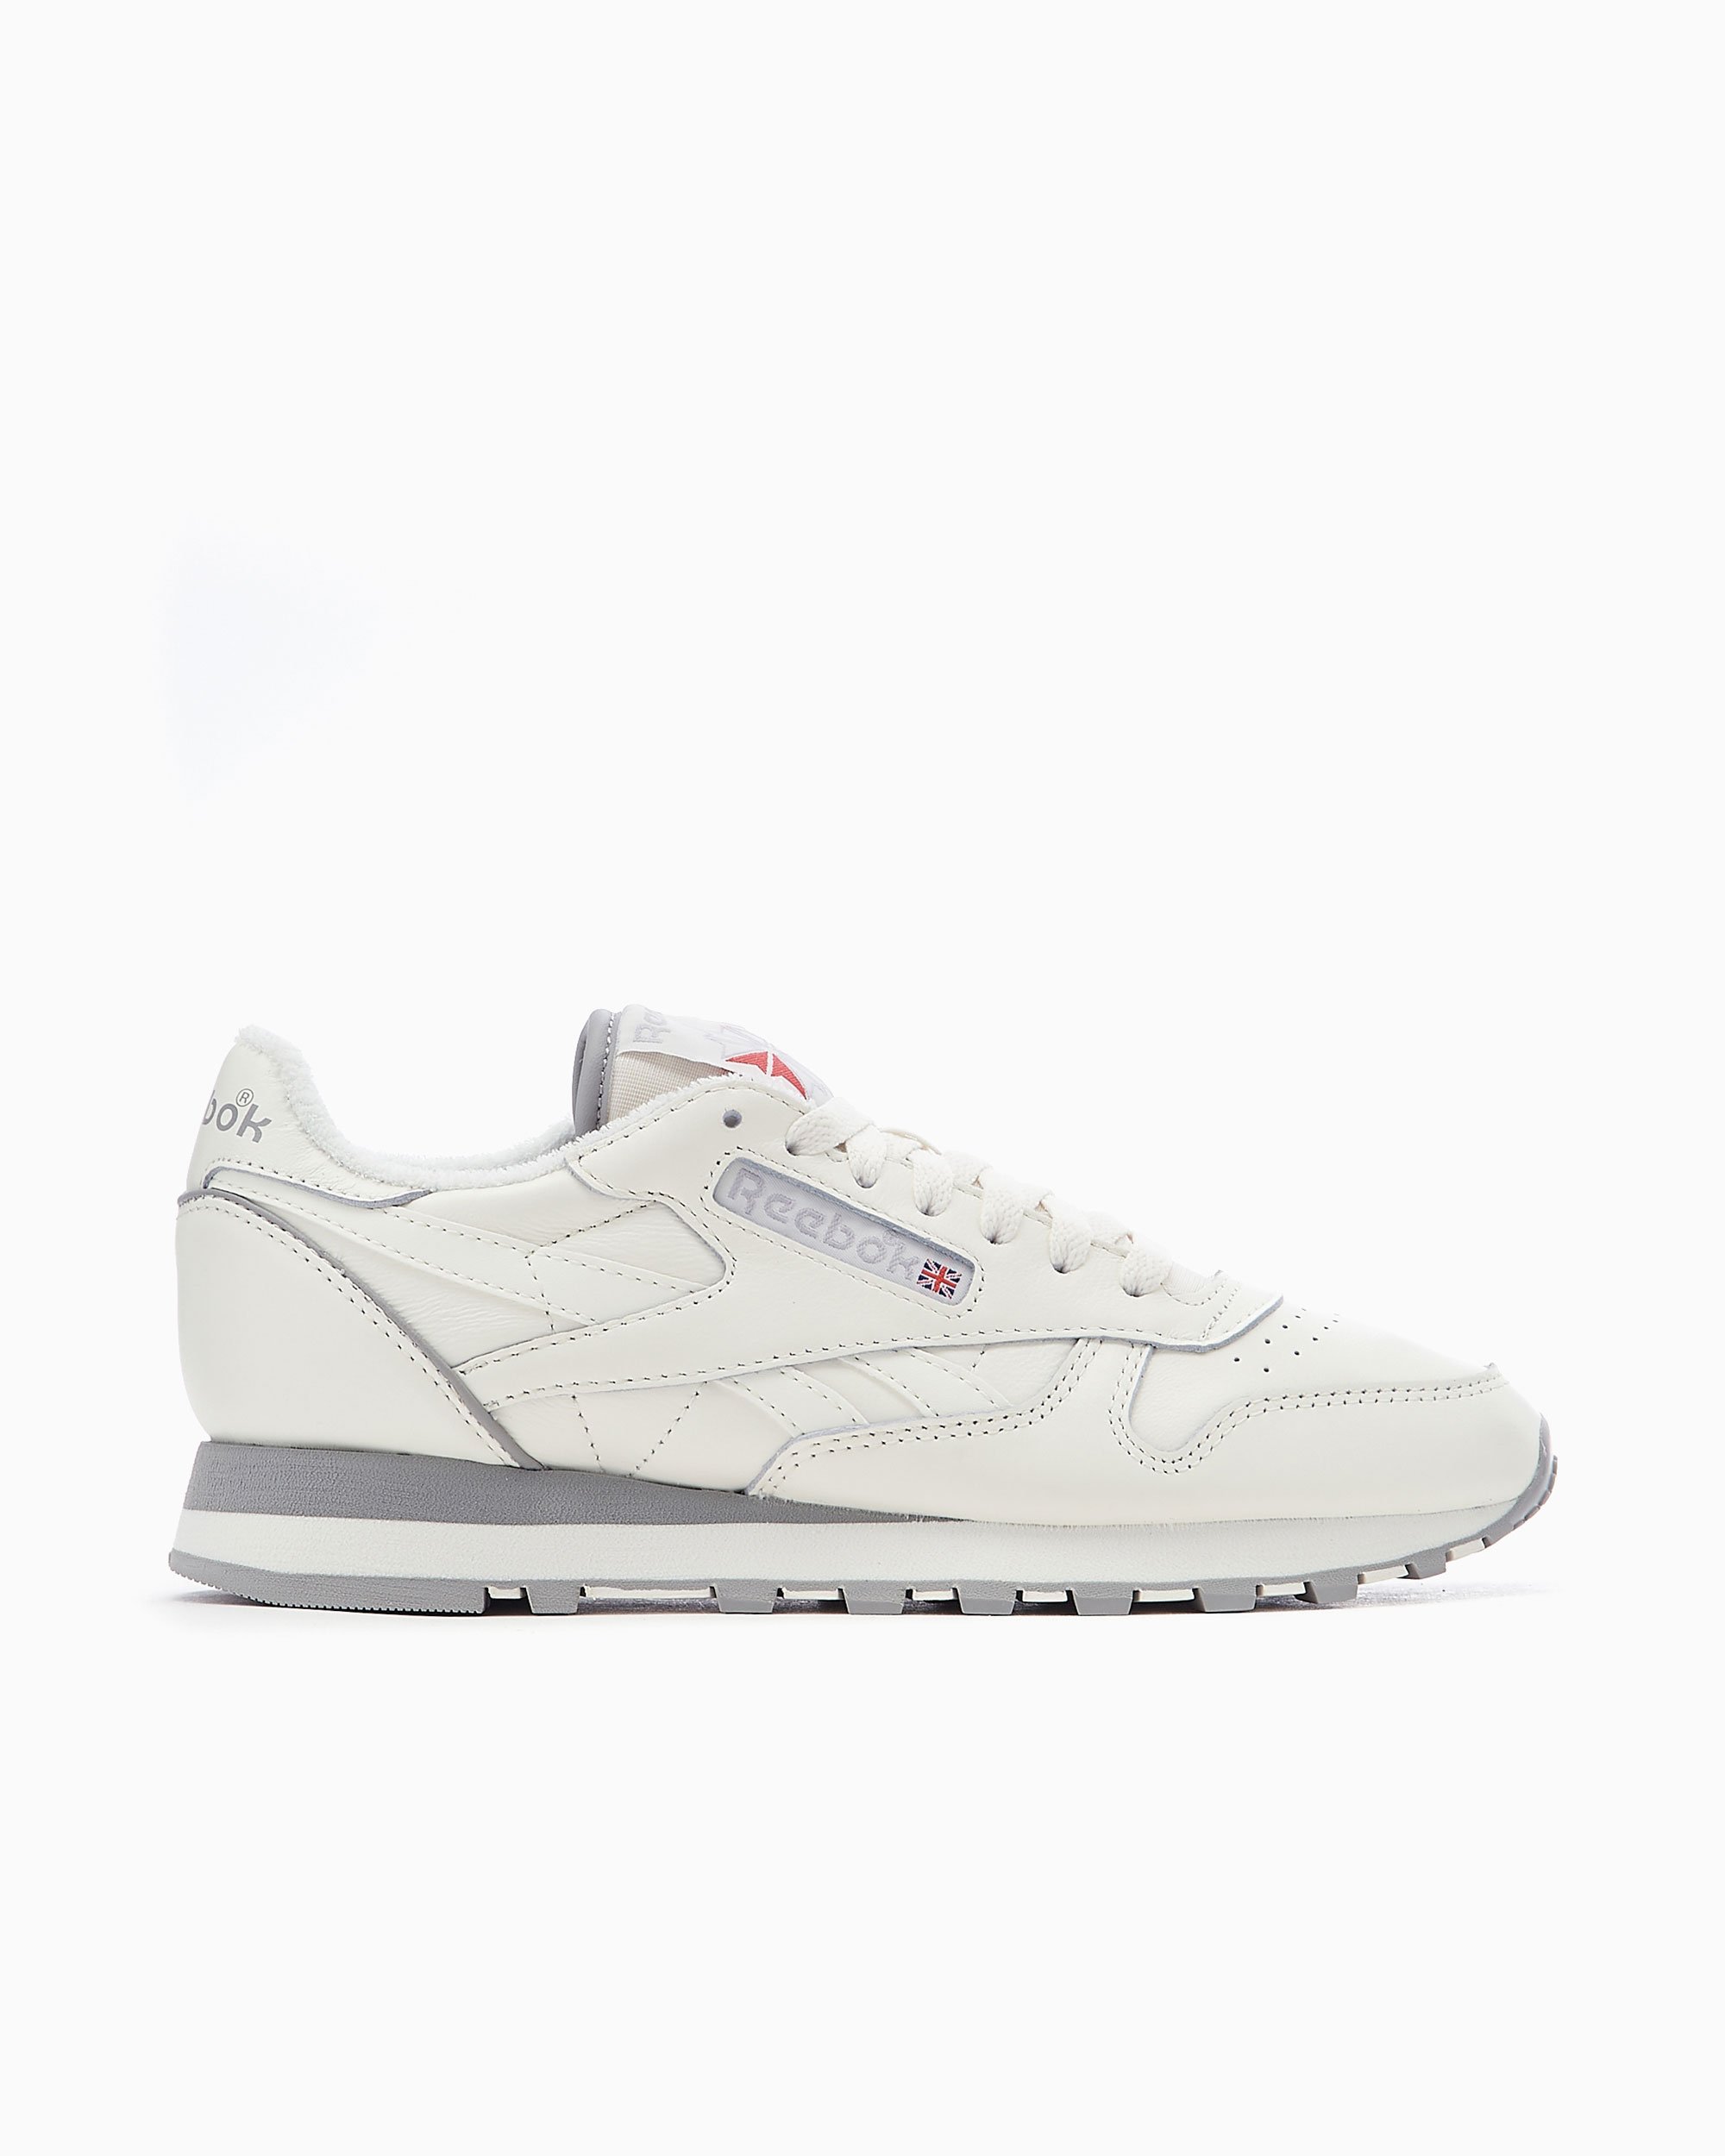 Reebok Classic Leather 1983 Vintage White GX0281| Buy Online at ...